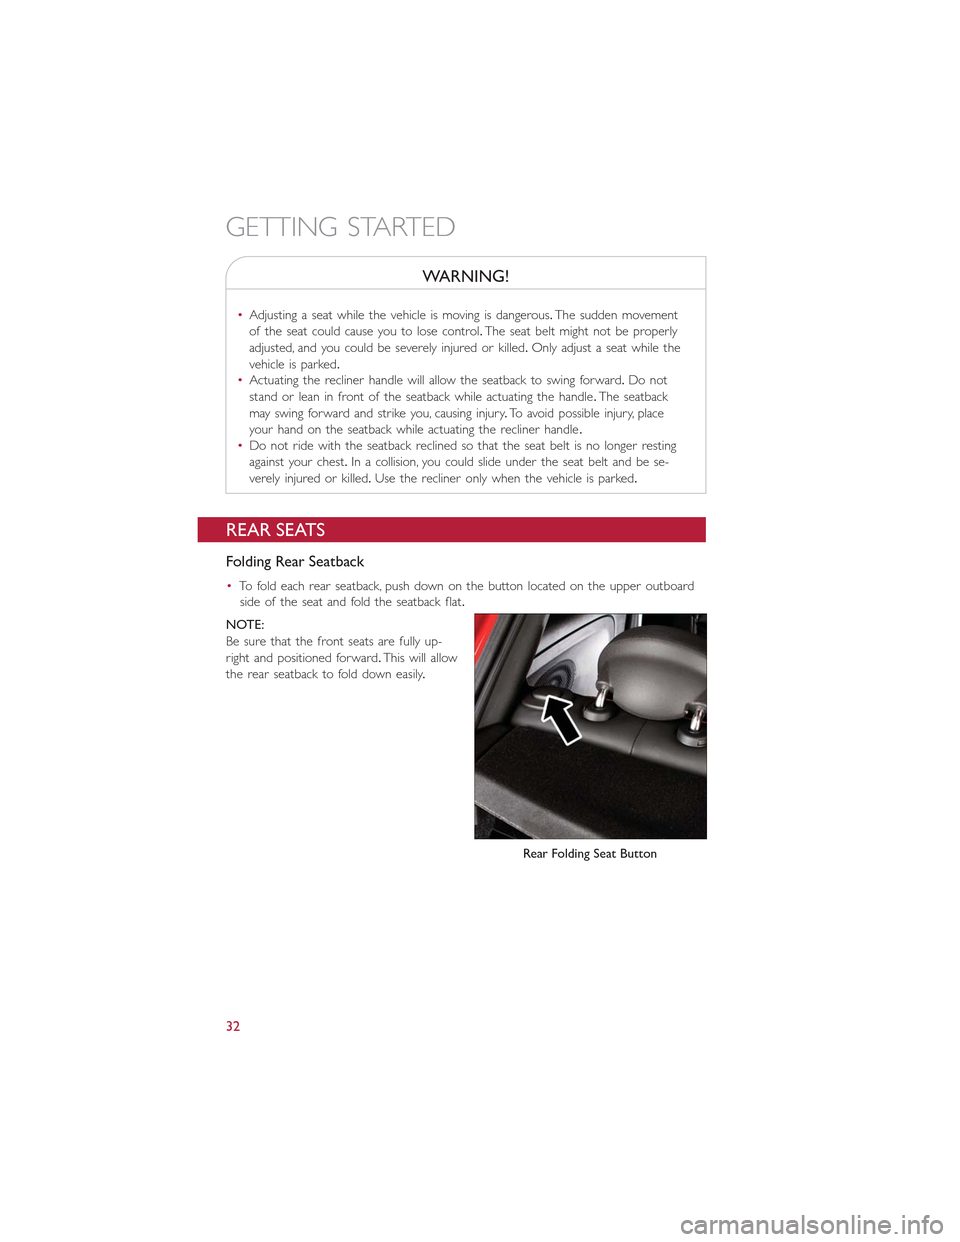 FIAT 500E 2015 2.G Owners Guide WARNING!
•Adjusting a seat while the vehicle is moving is dangerous.The sudden movement
of the seat could cause you to lose control.The seat belt might not be properly
adjusted, and you could be sev